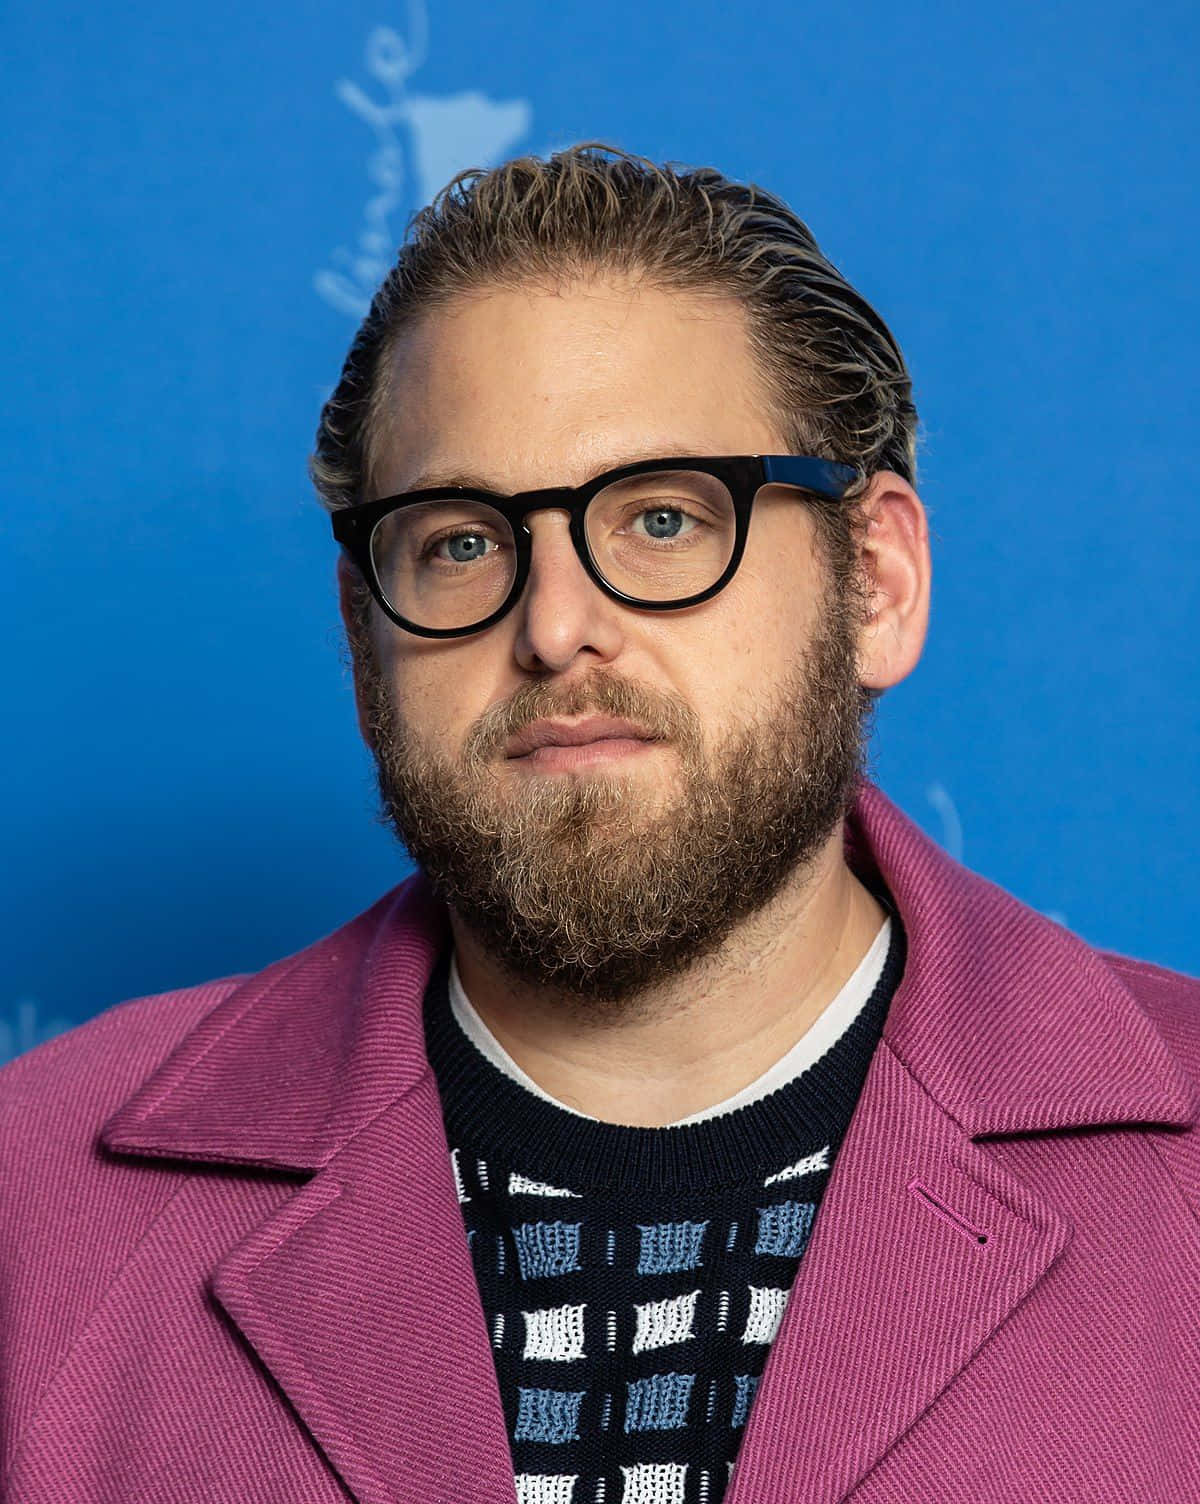 Jonah Hill Impresses With A Smart Look. Wallpaper